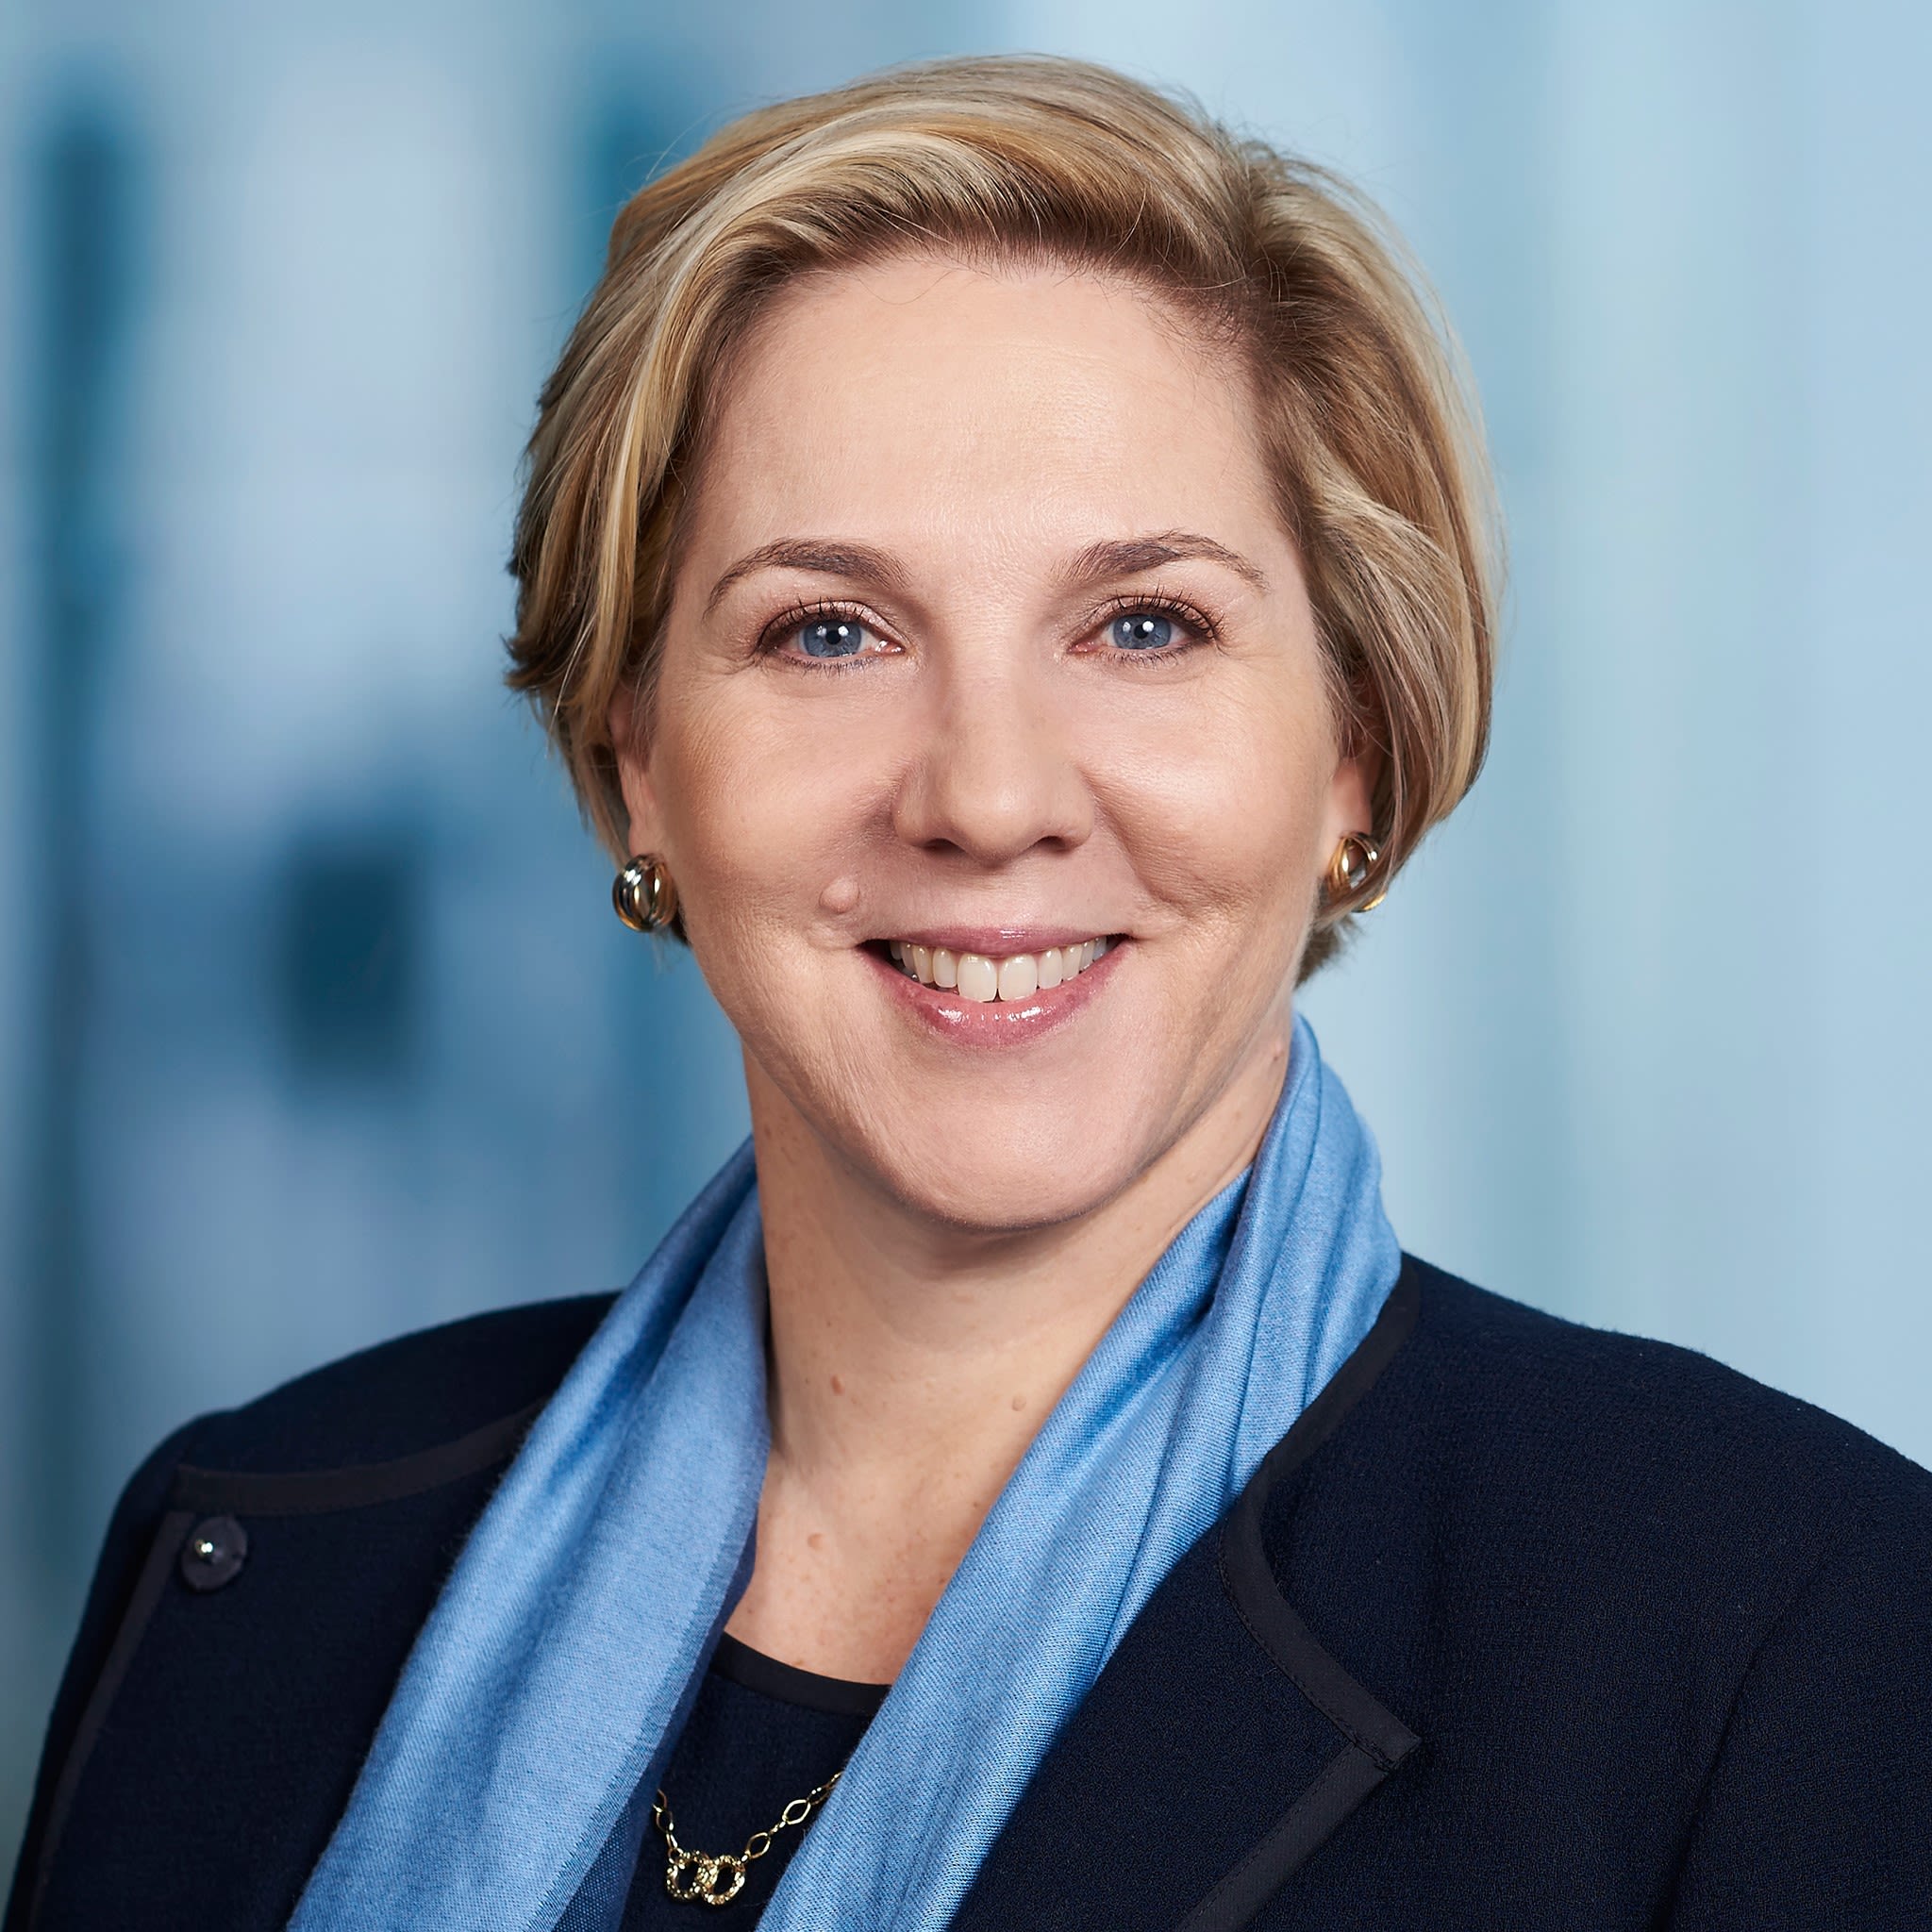 Business Briefing with Robyn Denholm